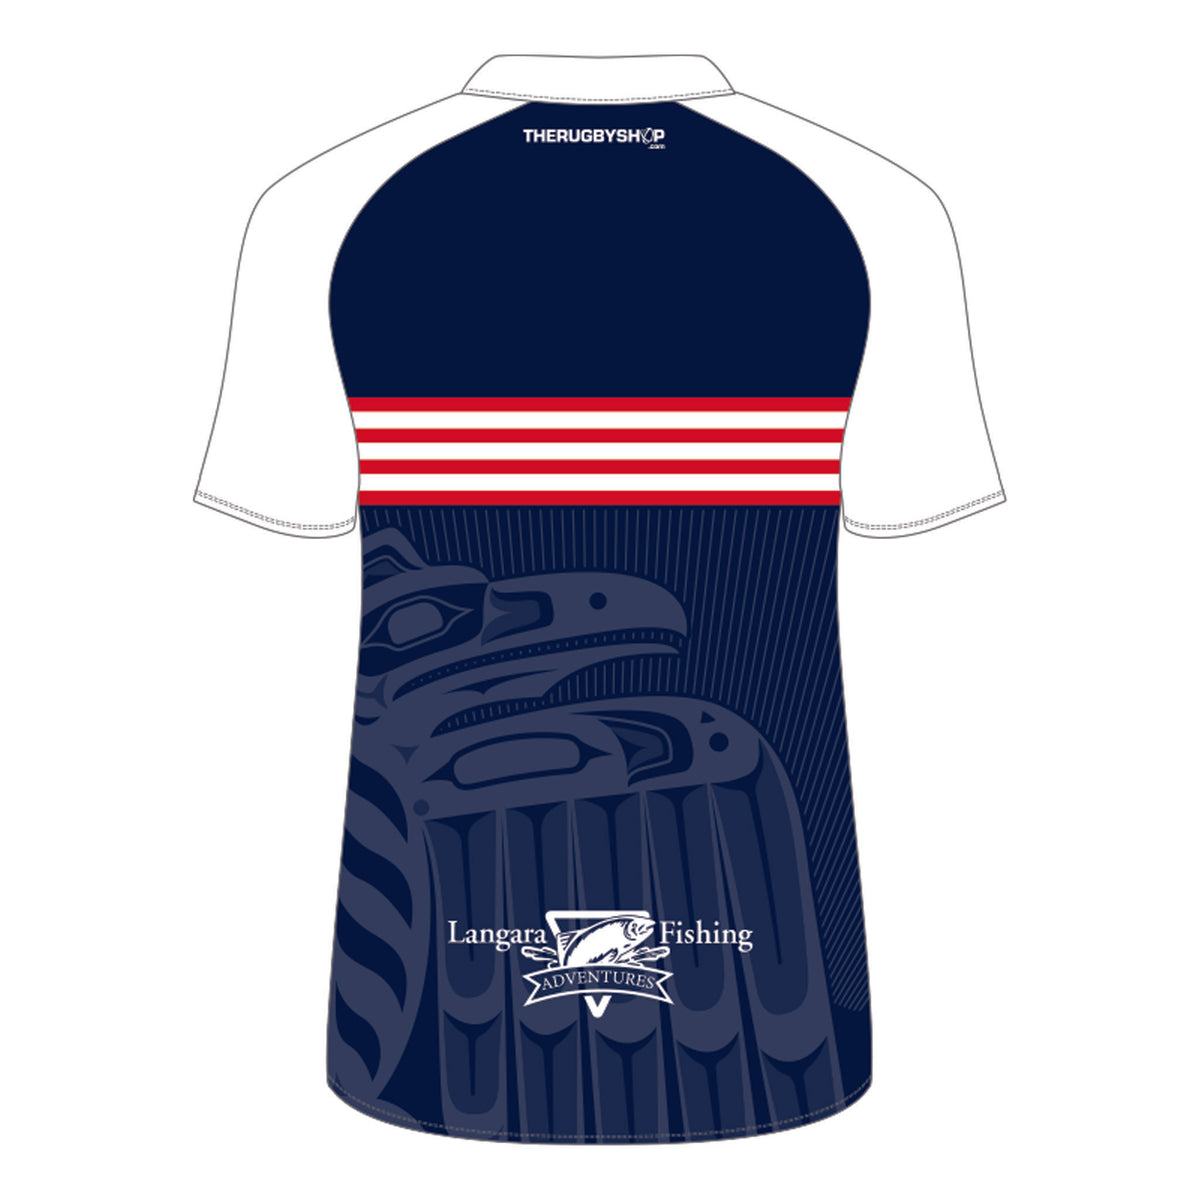 UBCOB Ravens 50th Year Anniversary Performance Rugby Shirt - Adult Unisex Sizing XS-4XL - Navy/White/Red